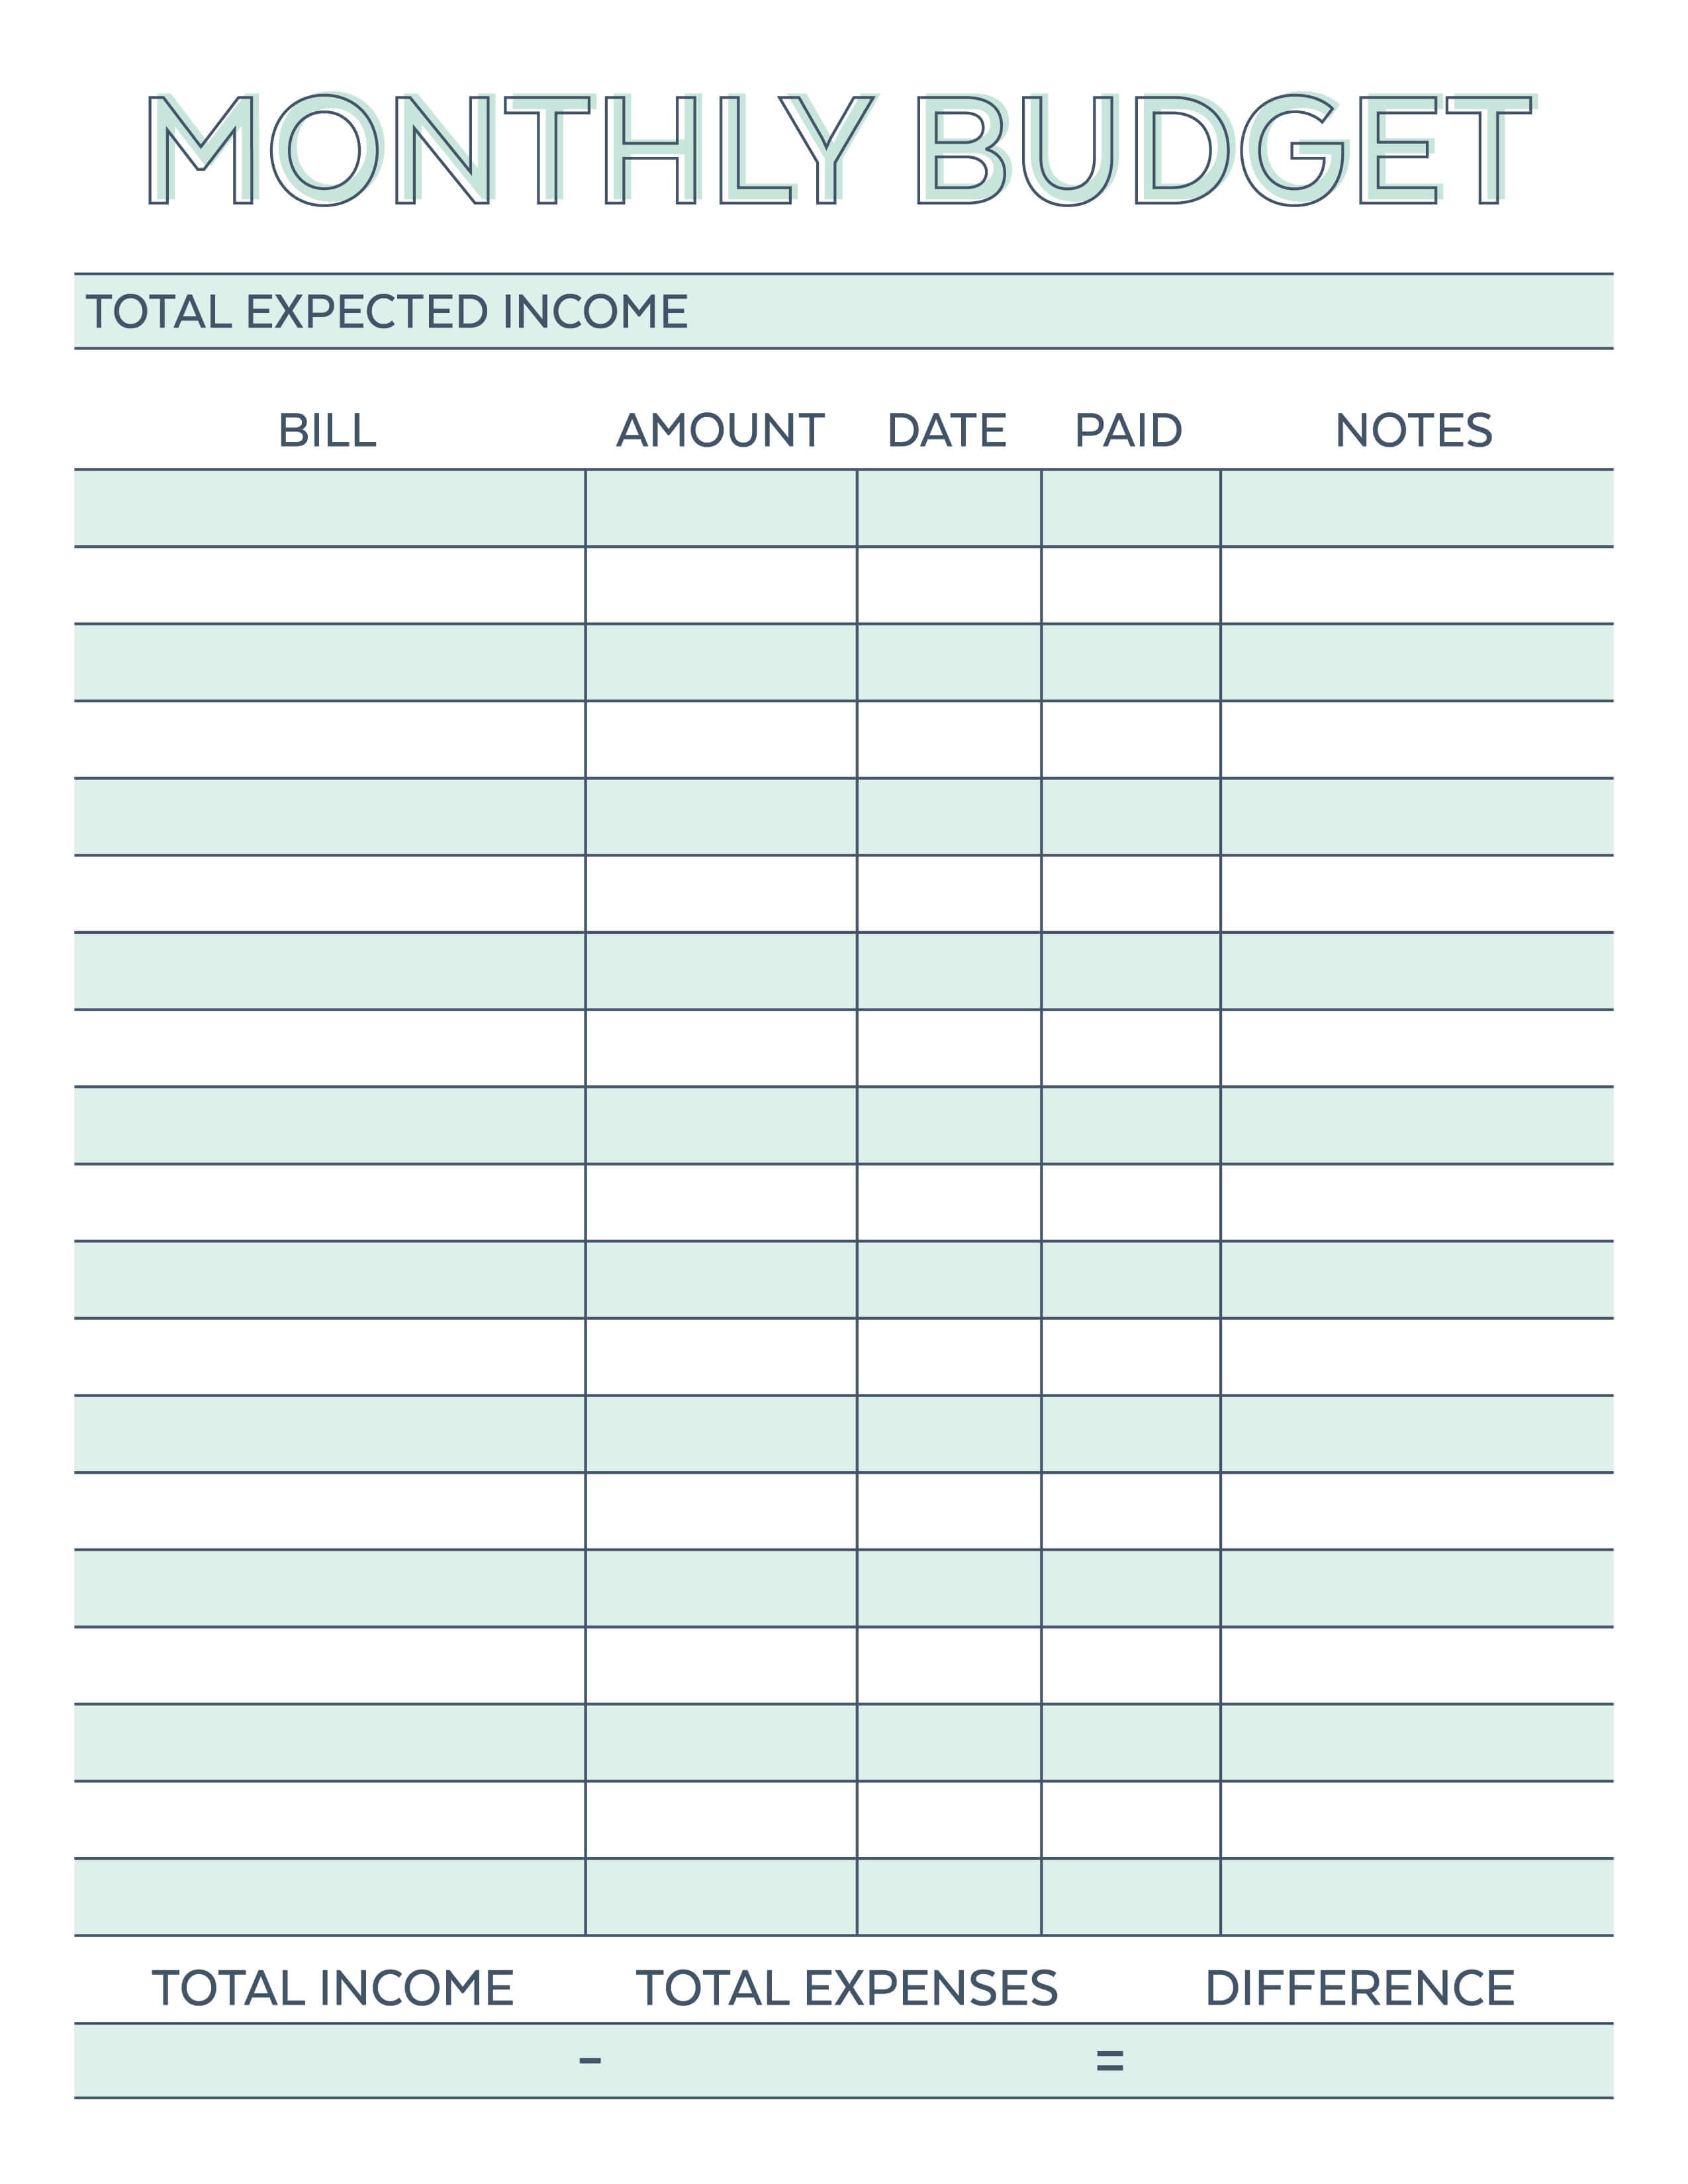 Monthly Budget Planner - Free Printable Budget Worksheet - Free Budget Printable Template